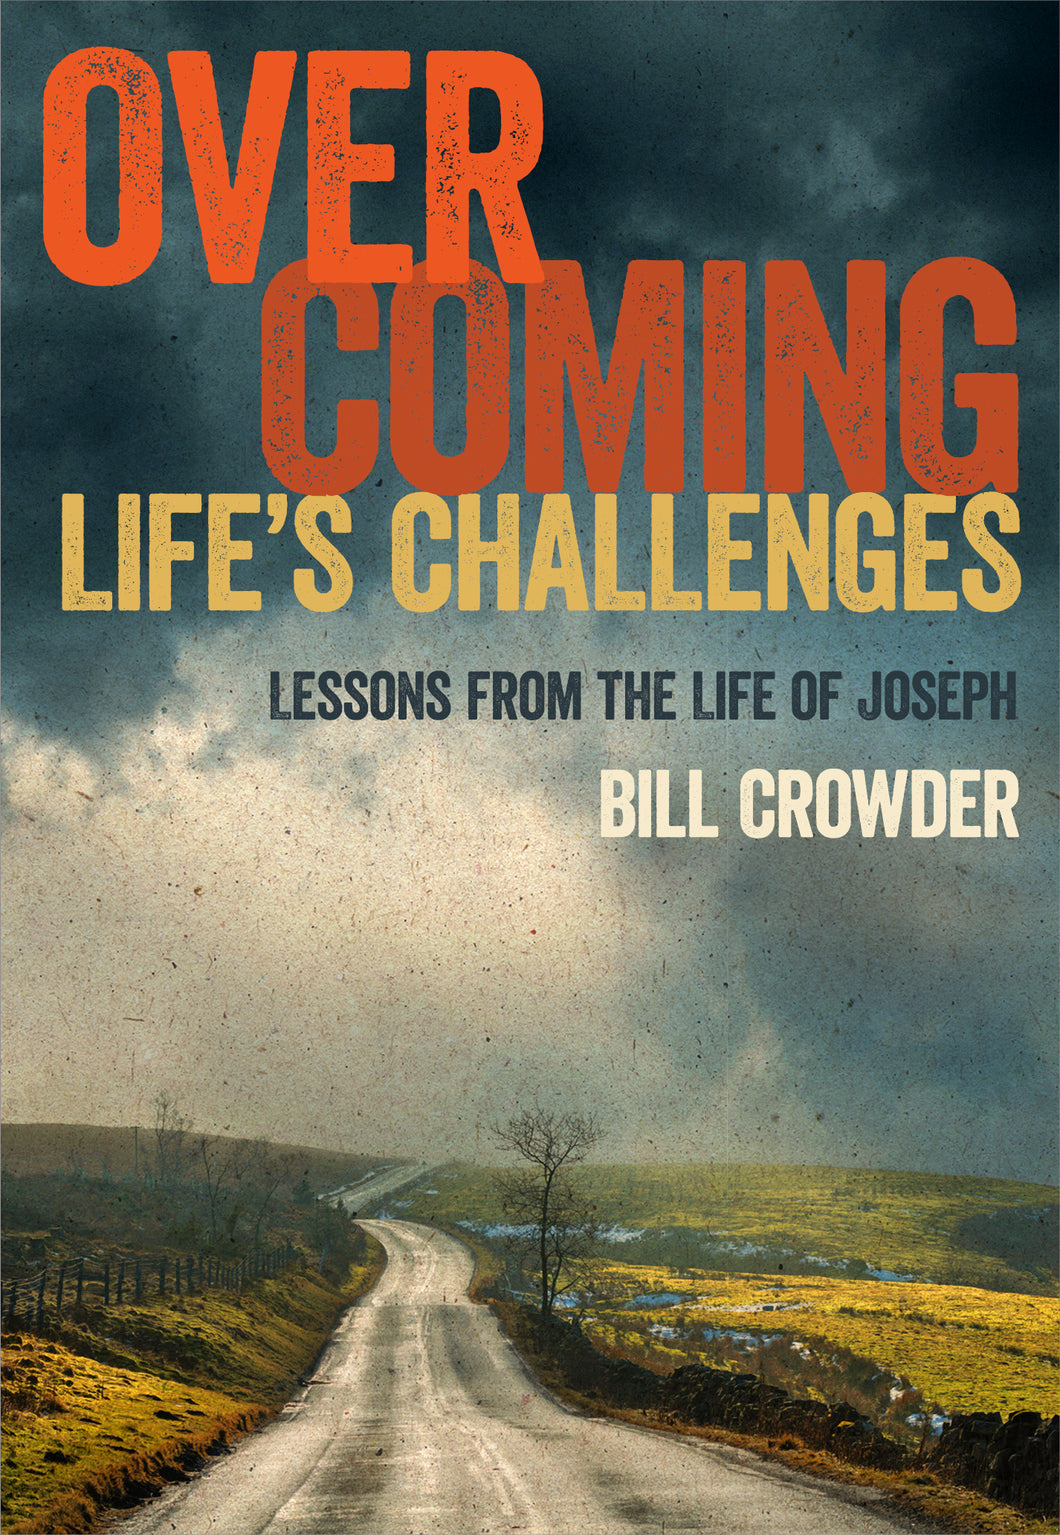 Overcoming Life's Challenges [E-book]